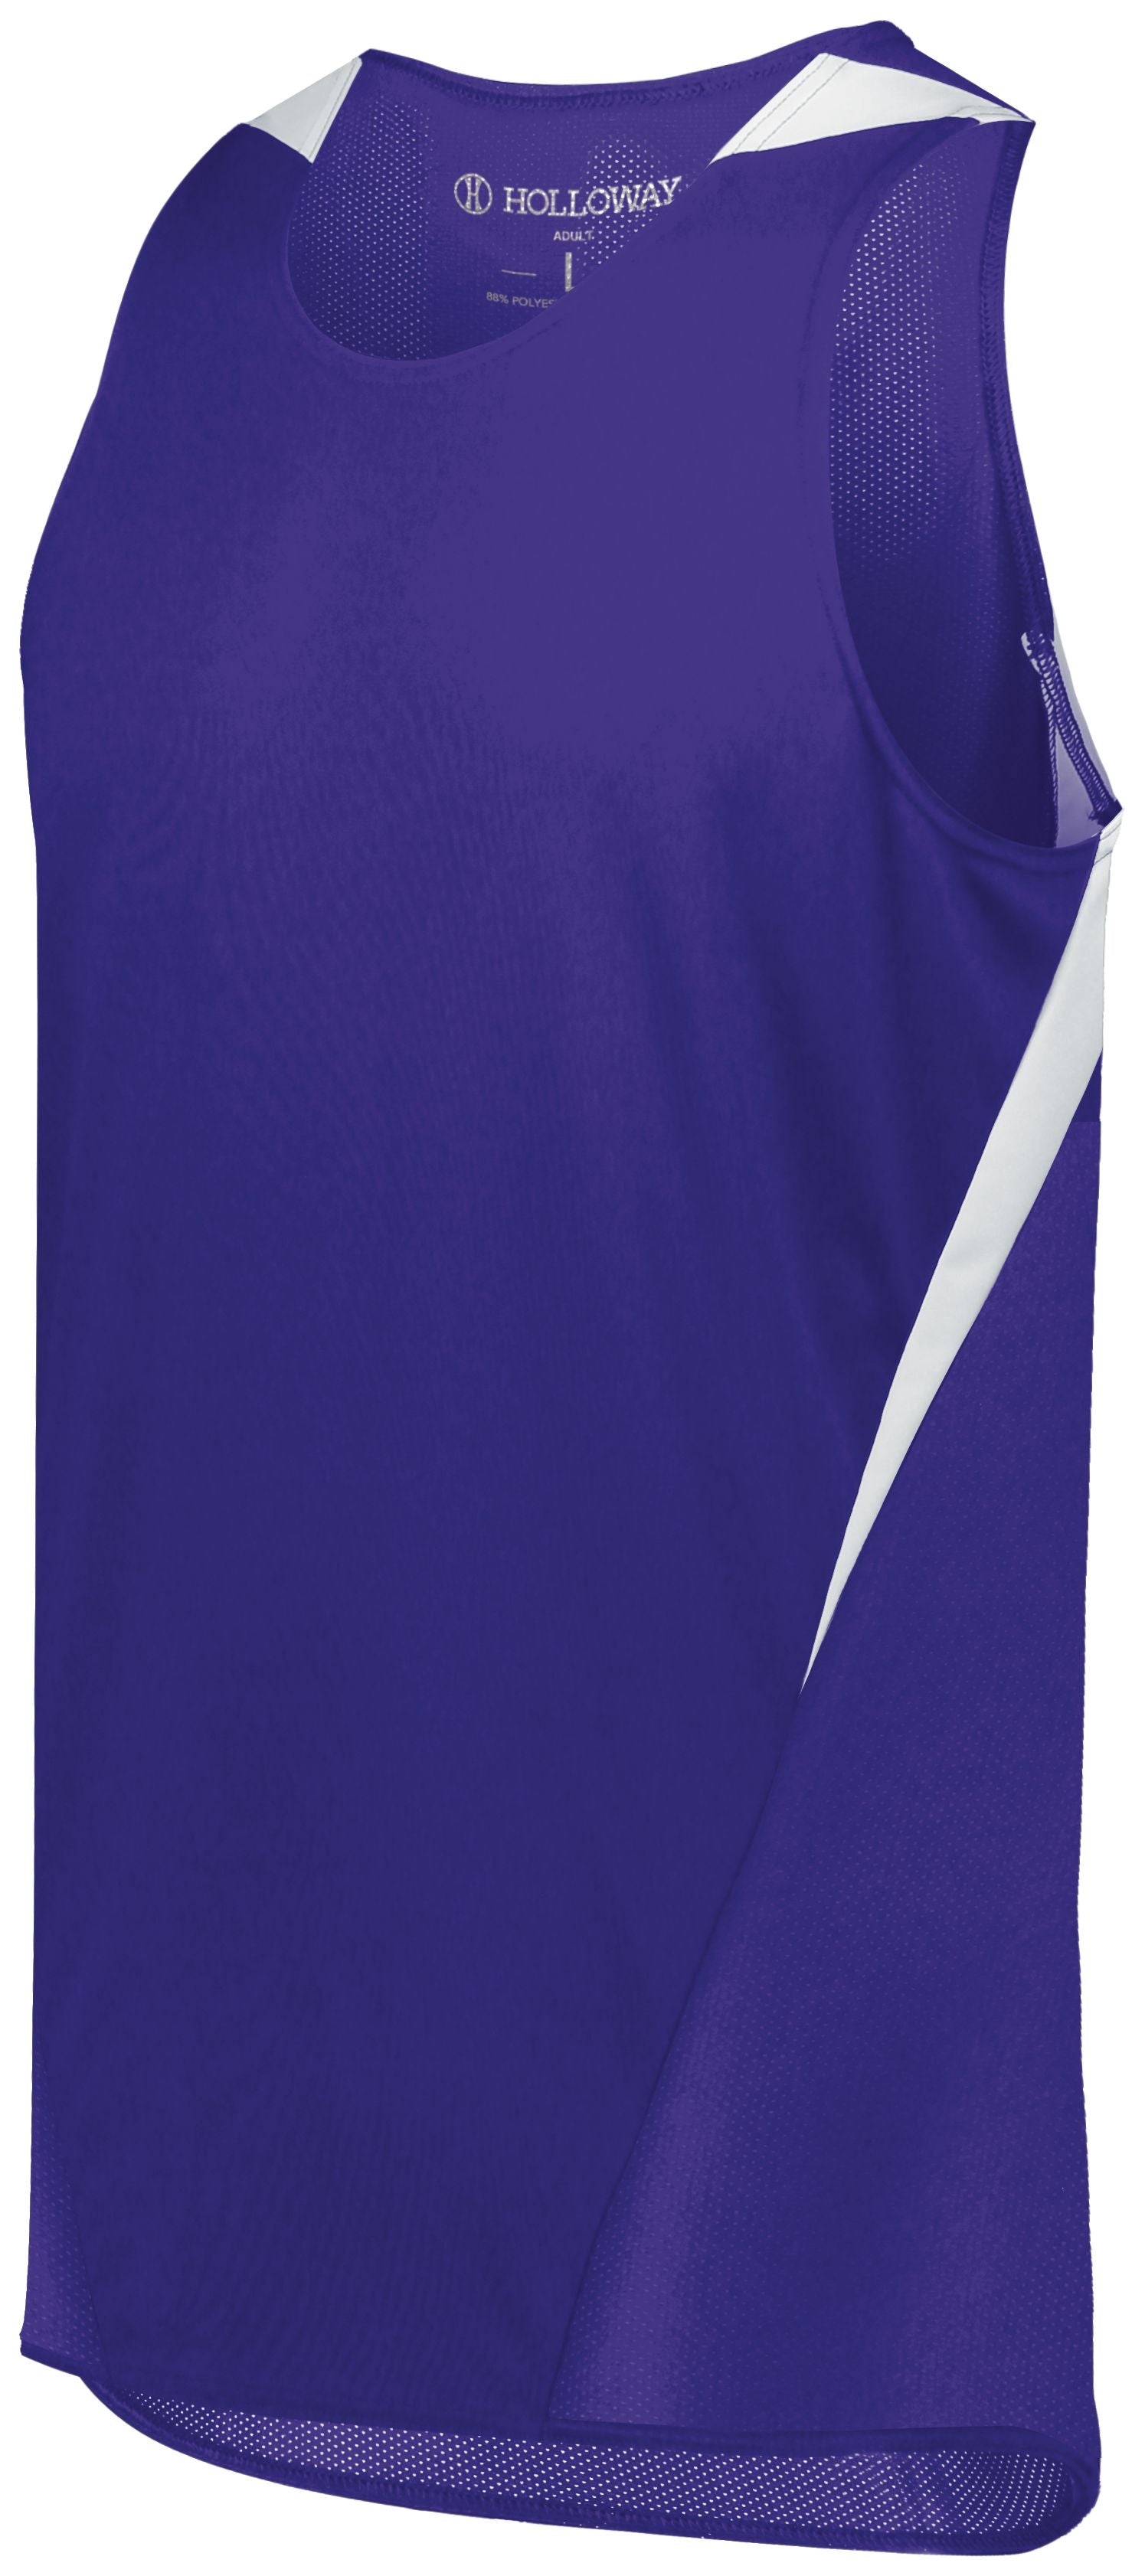 Holloway Pr Max Track Jersey in Purple/White  -Part of the Adult, Adult-Jersey, Track-Field, Holloway, Shirts product lines at KanaleyCreations.com